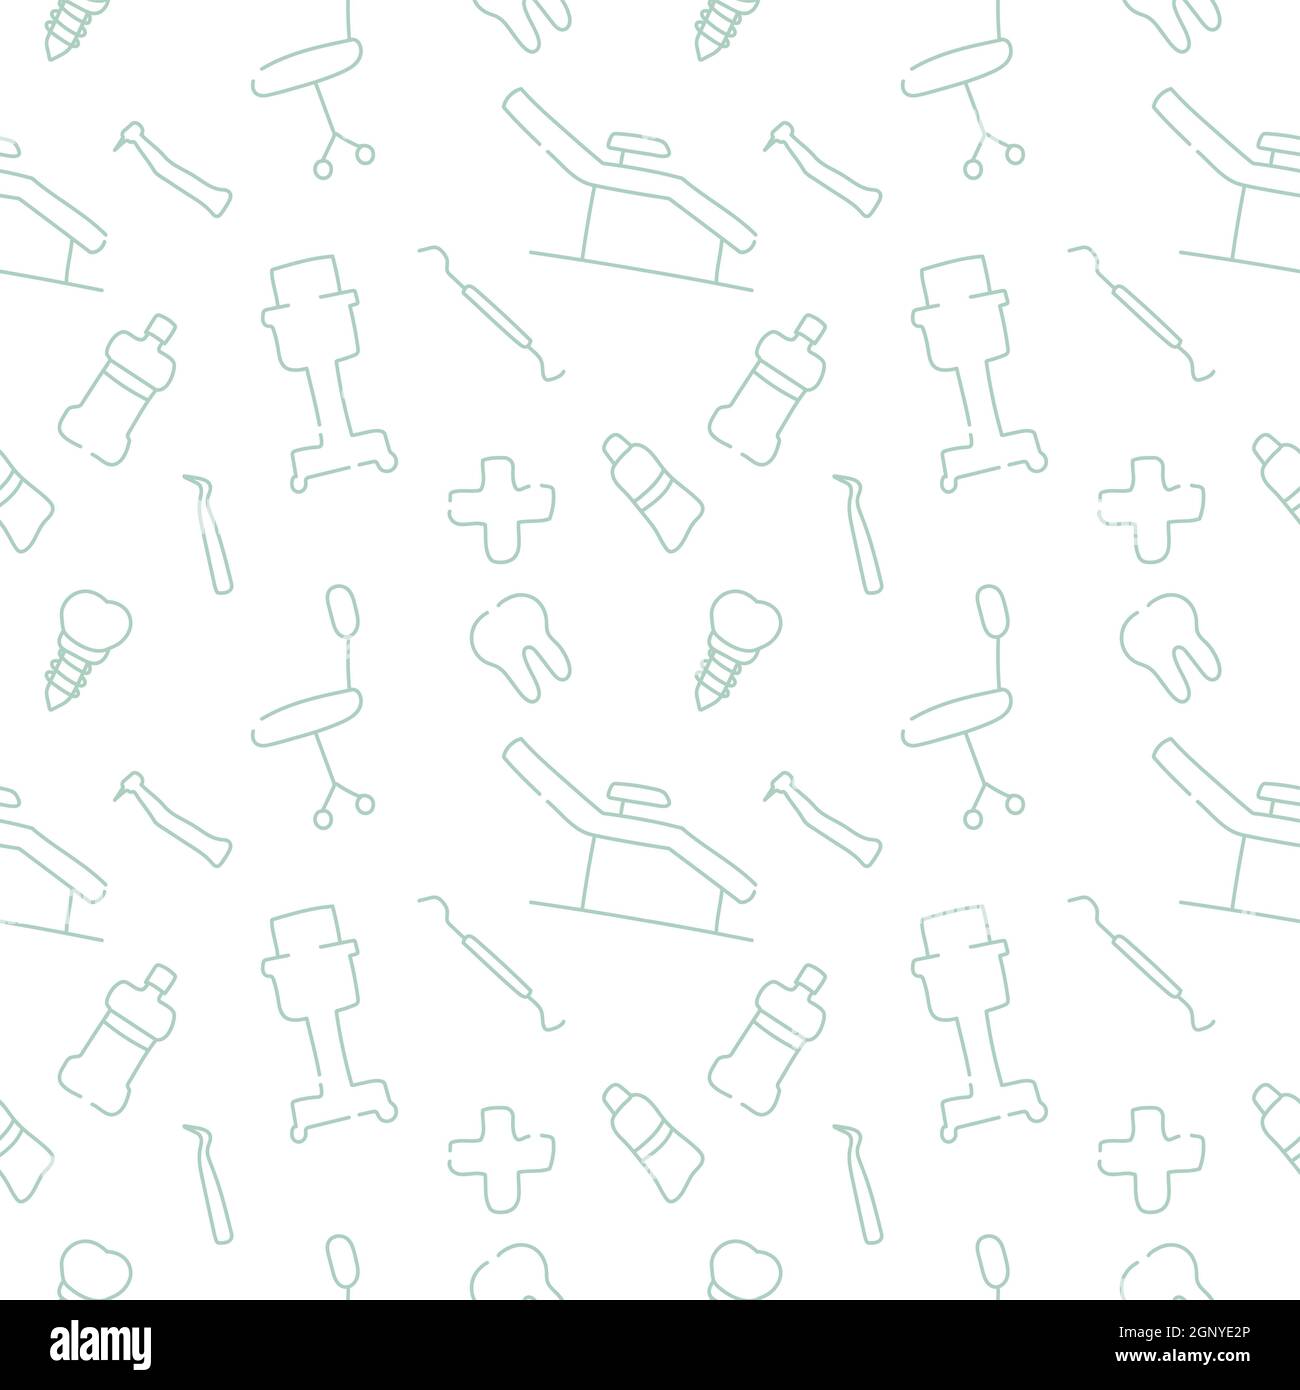 Dental care, Orthodontics Seamless Pattern with Line Icons. Dentist, Medical Equipment, Braces, Tooth Prosthesis, Floss, Caries Treatment, Toothpaste. Stock Vector